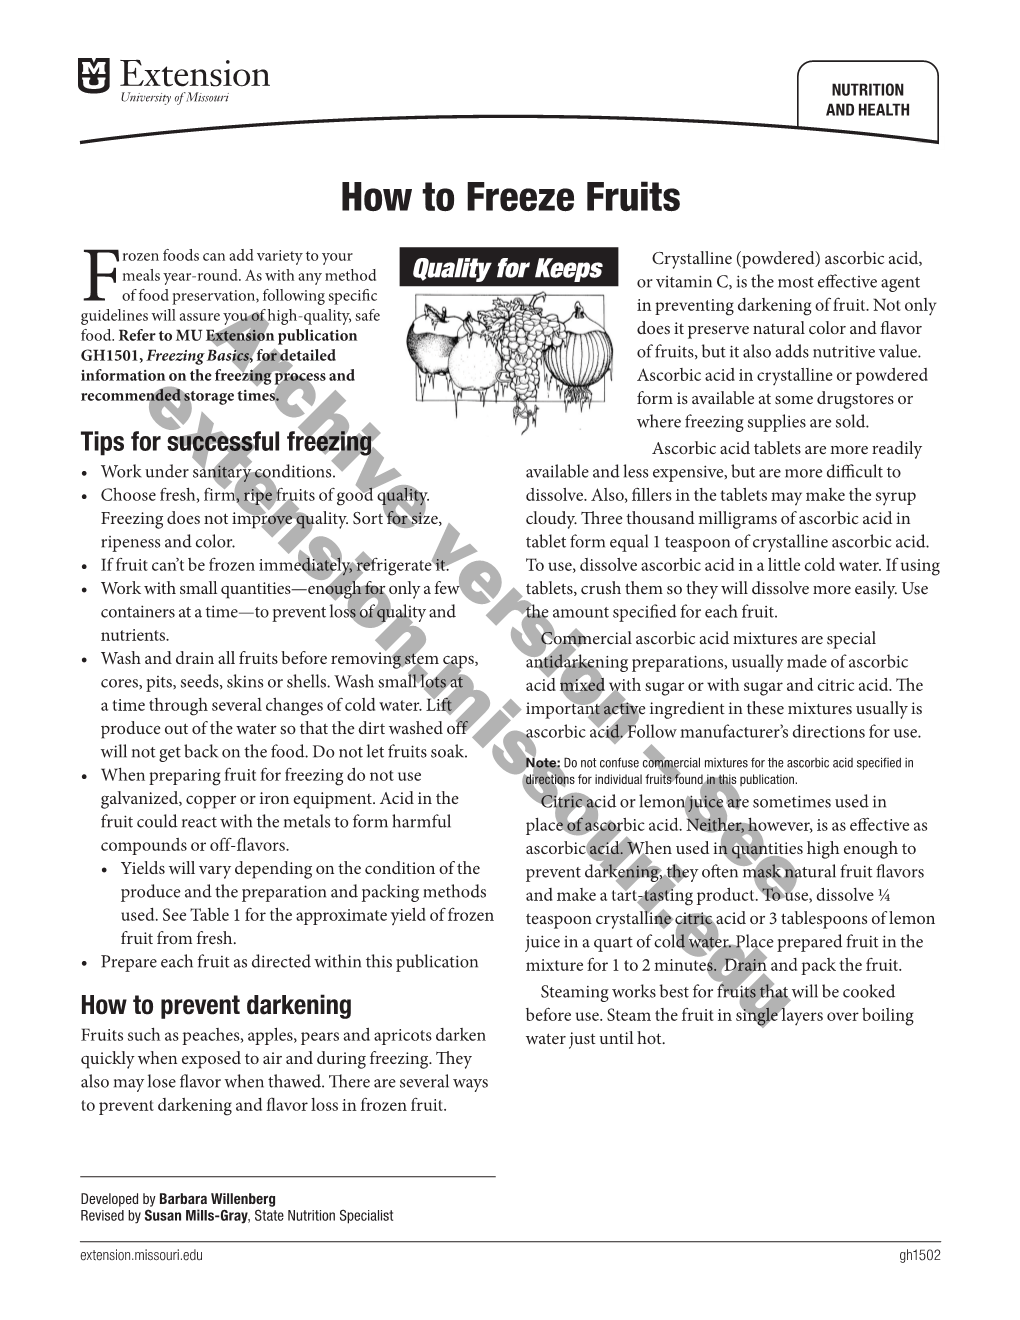 How to Freeze Fruits